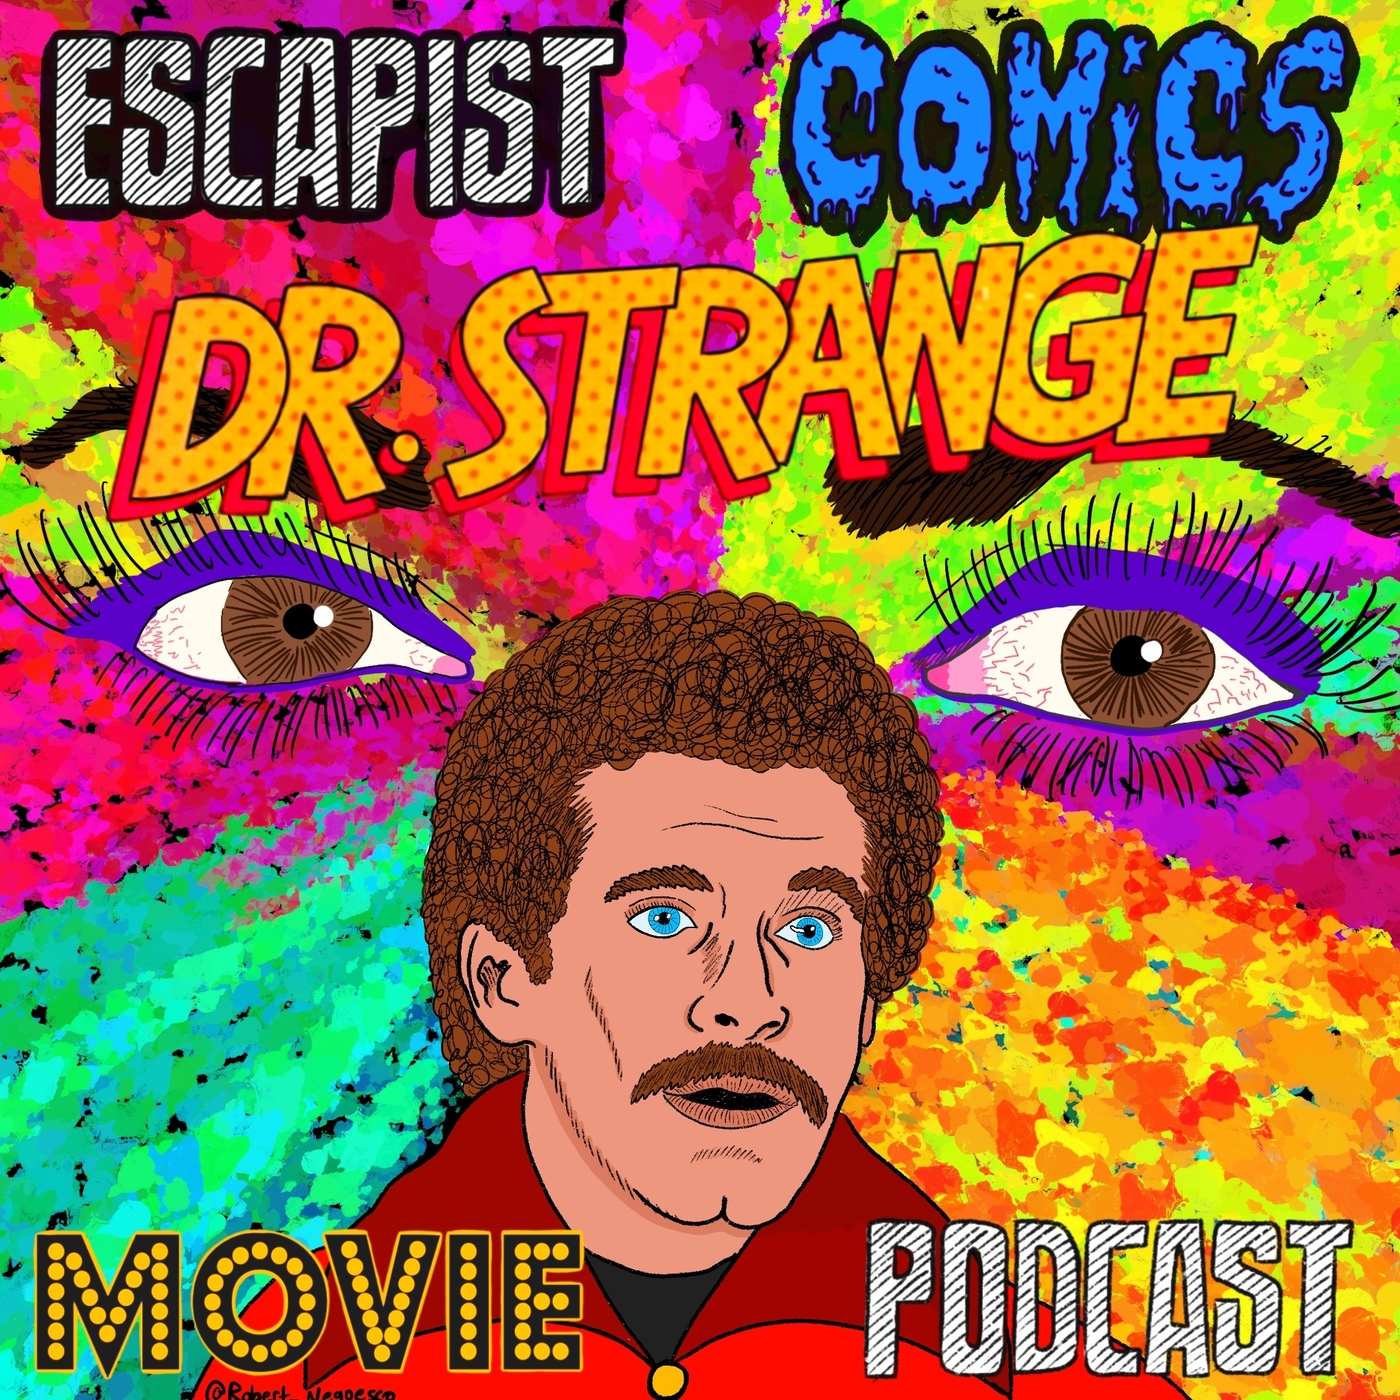 The Master of the Lecherous Arts (Dr. Strange 1978 Moviecast!)